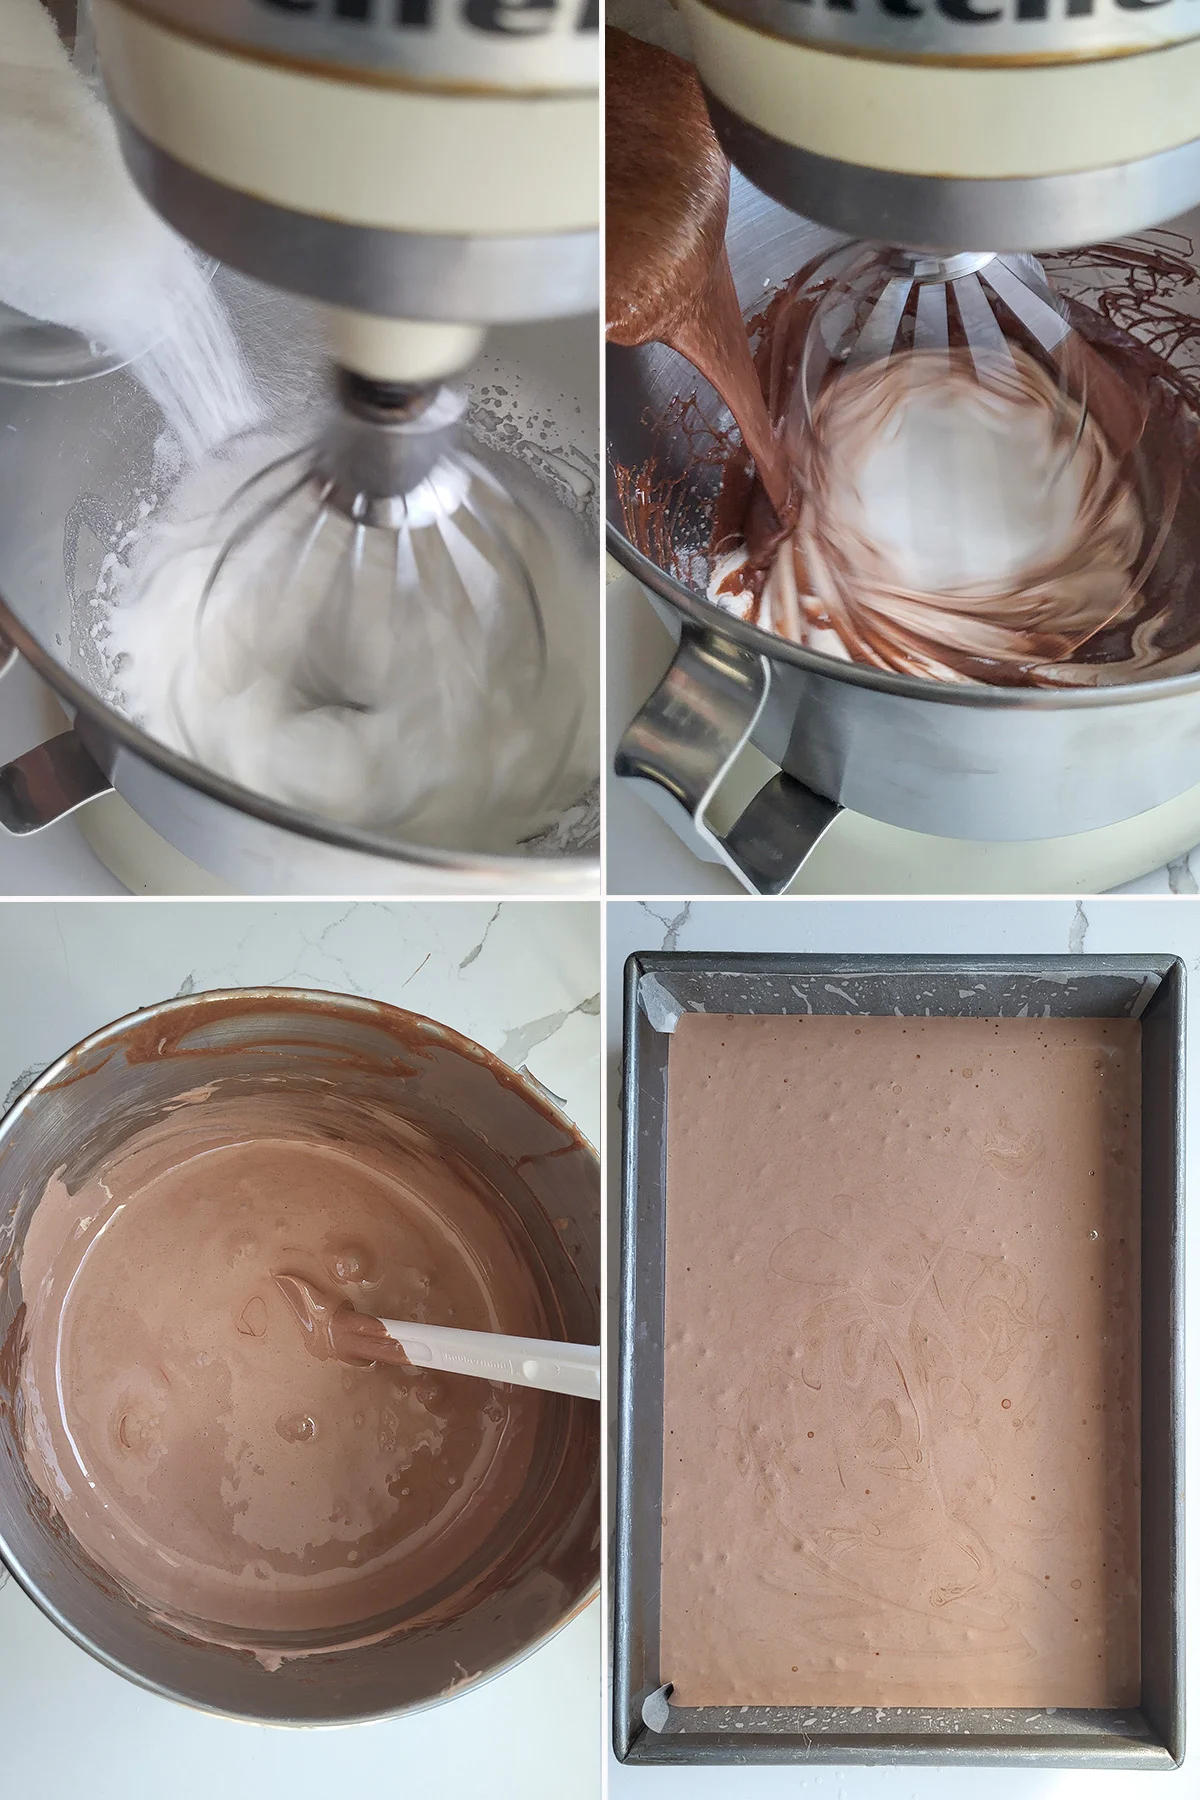 egg whites mixing in a bowl. Chocolate added to egg whites. Chocolate marshmallow mix in a pan.